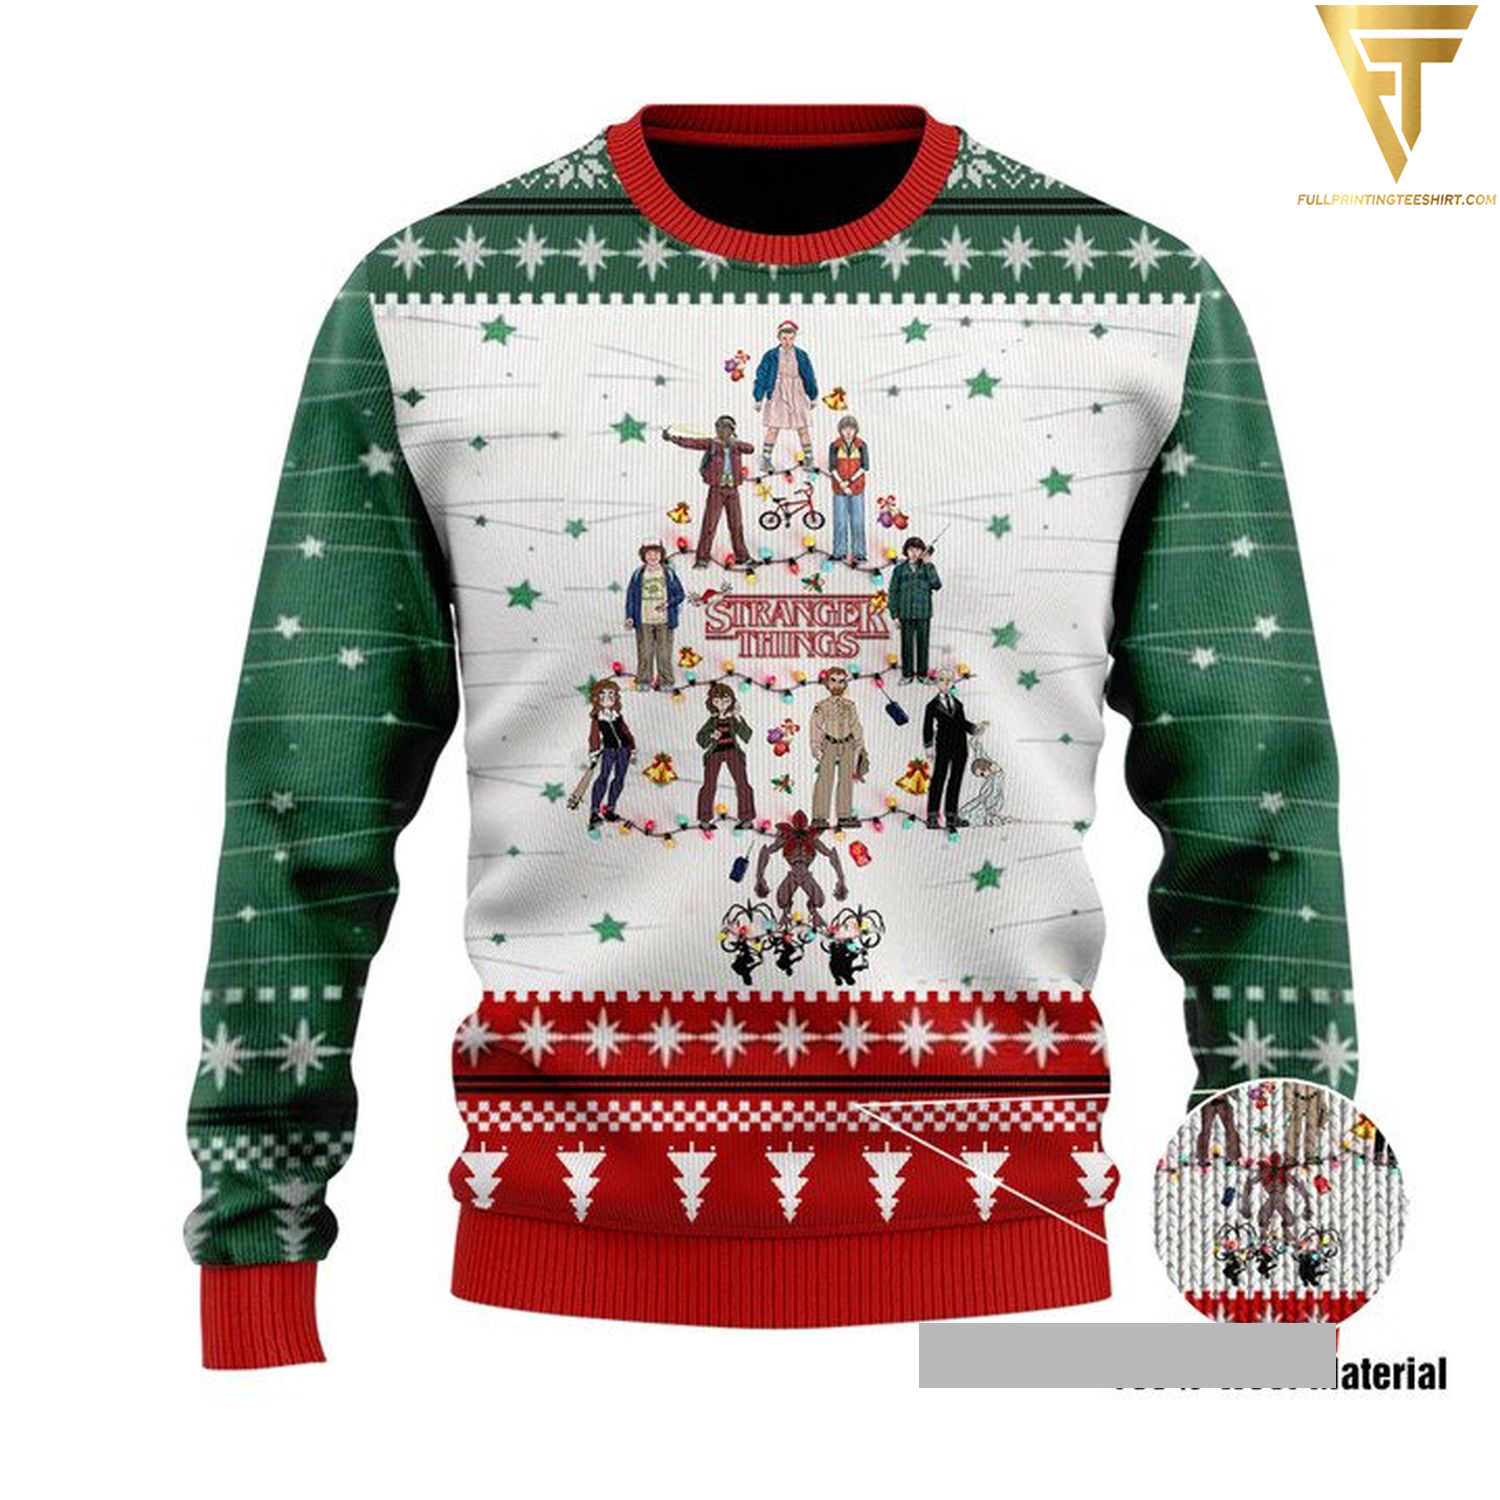 Stranger things movie ugly christmas sweater - Copy (2)